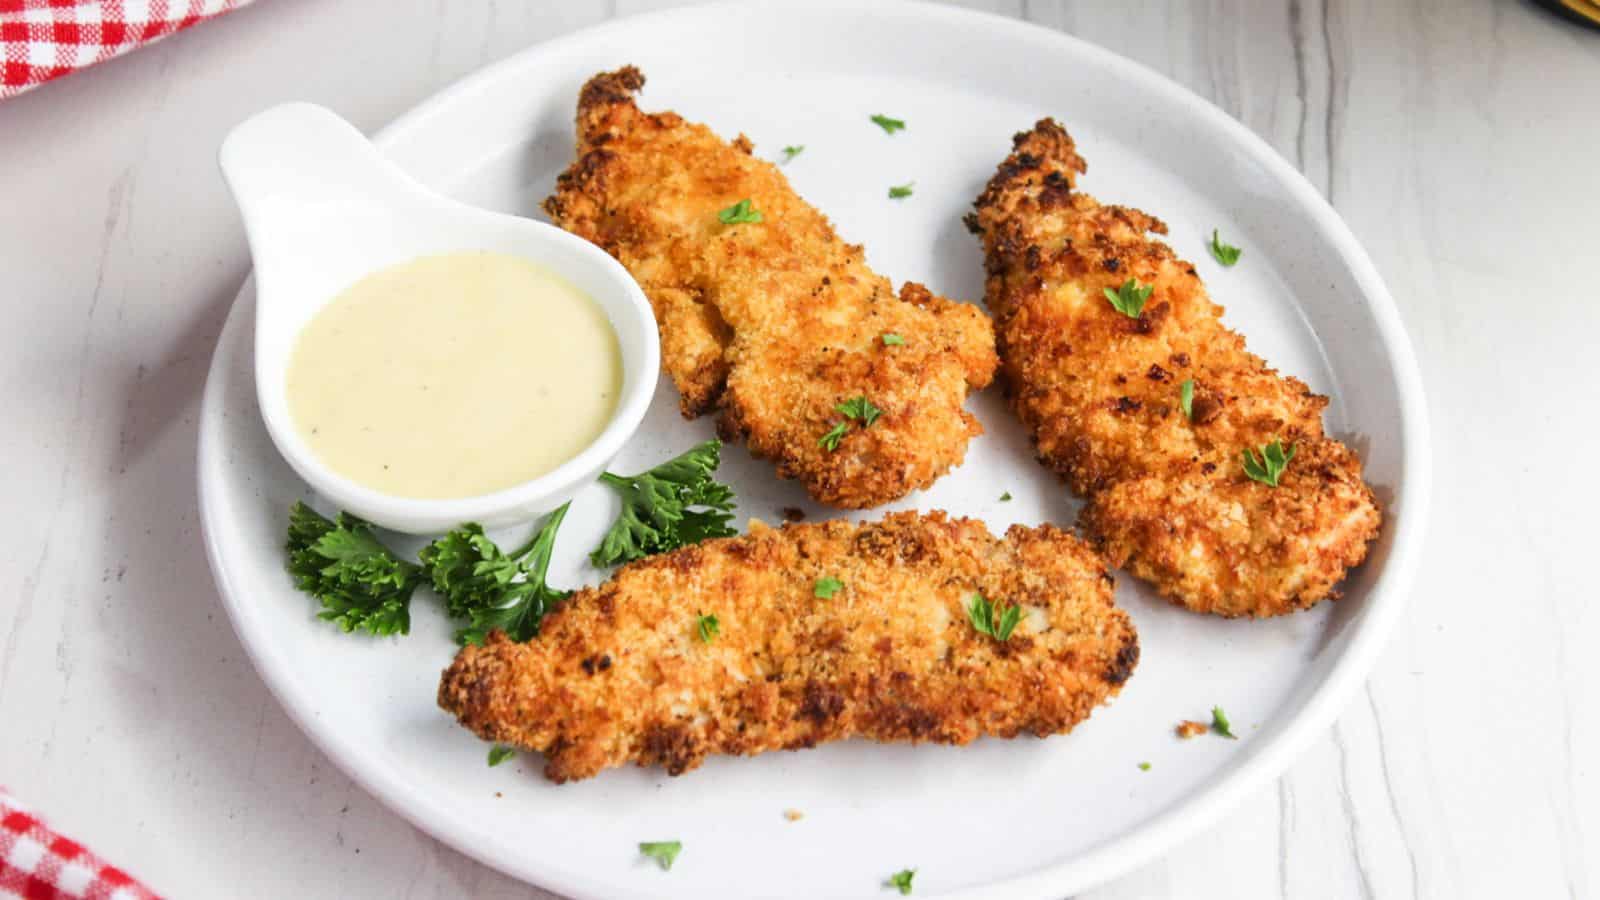 Fried chicken tenders on a plate with dipping sauce.